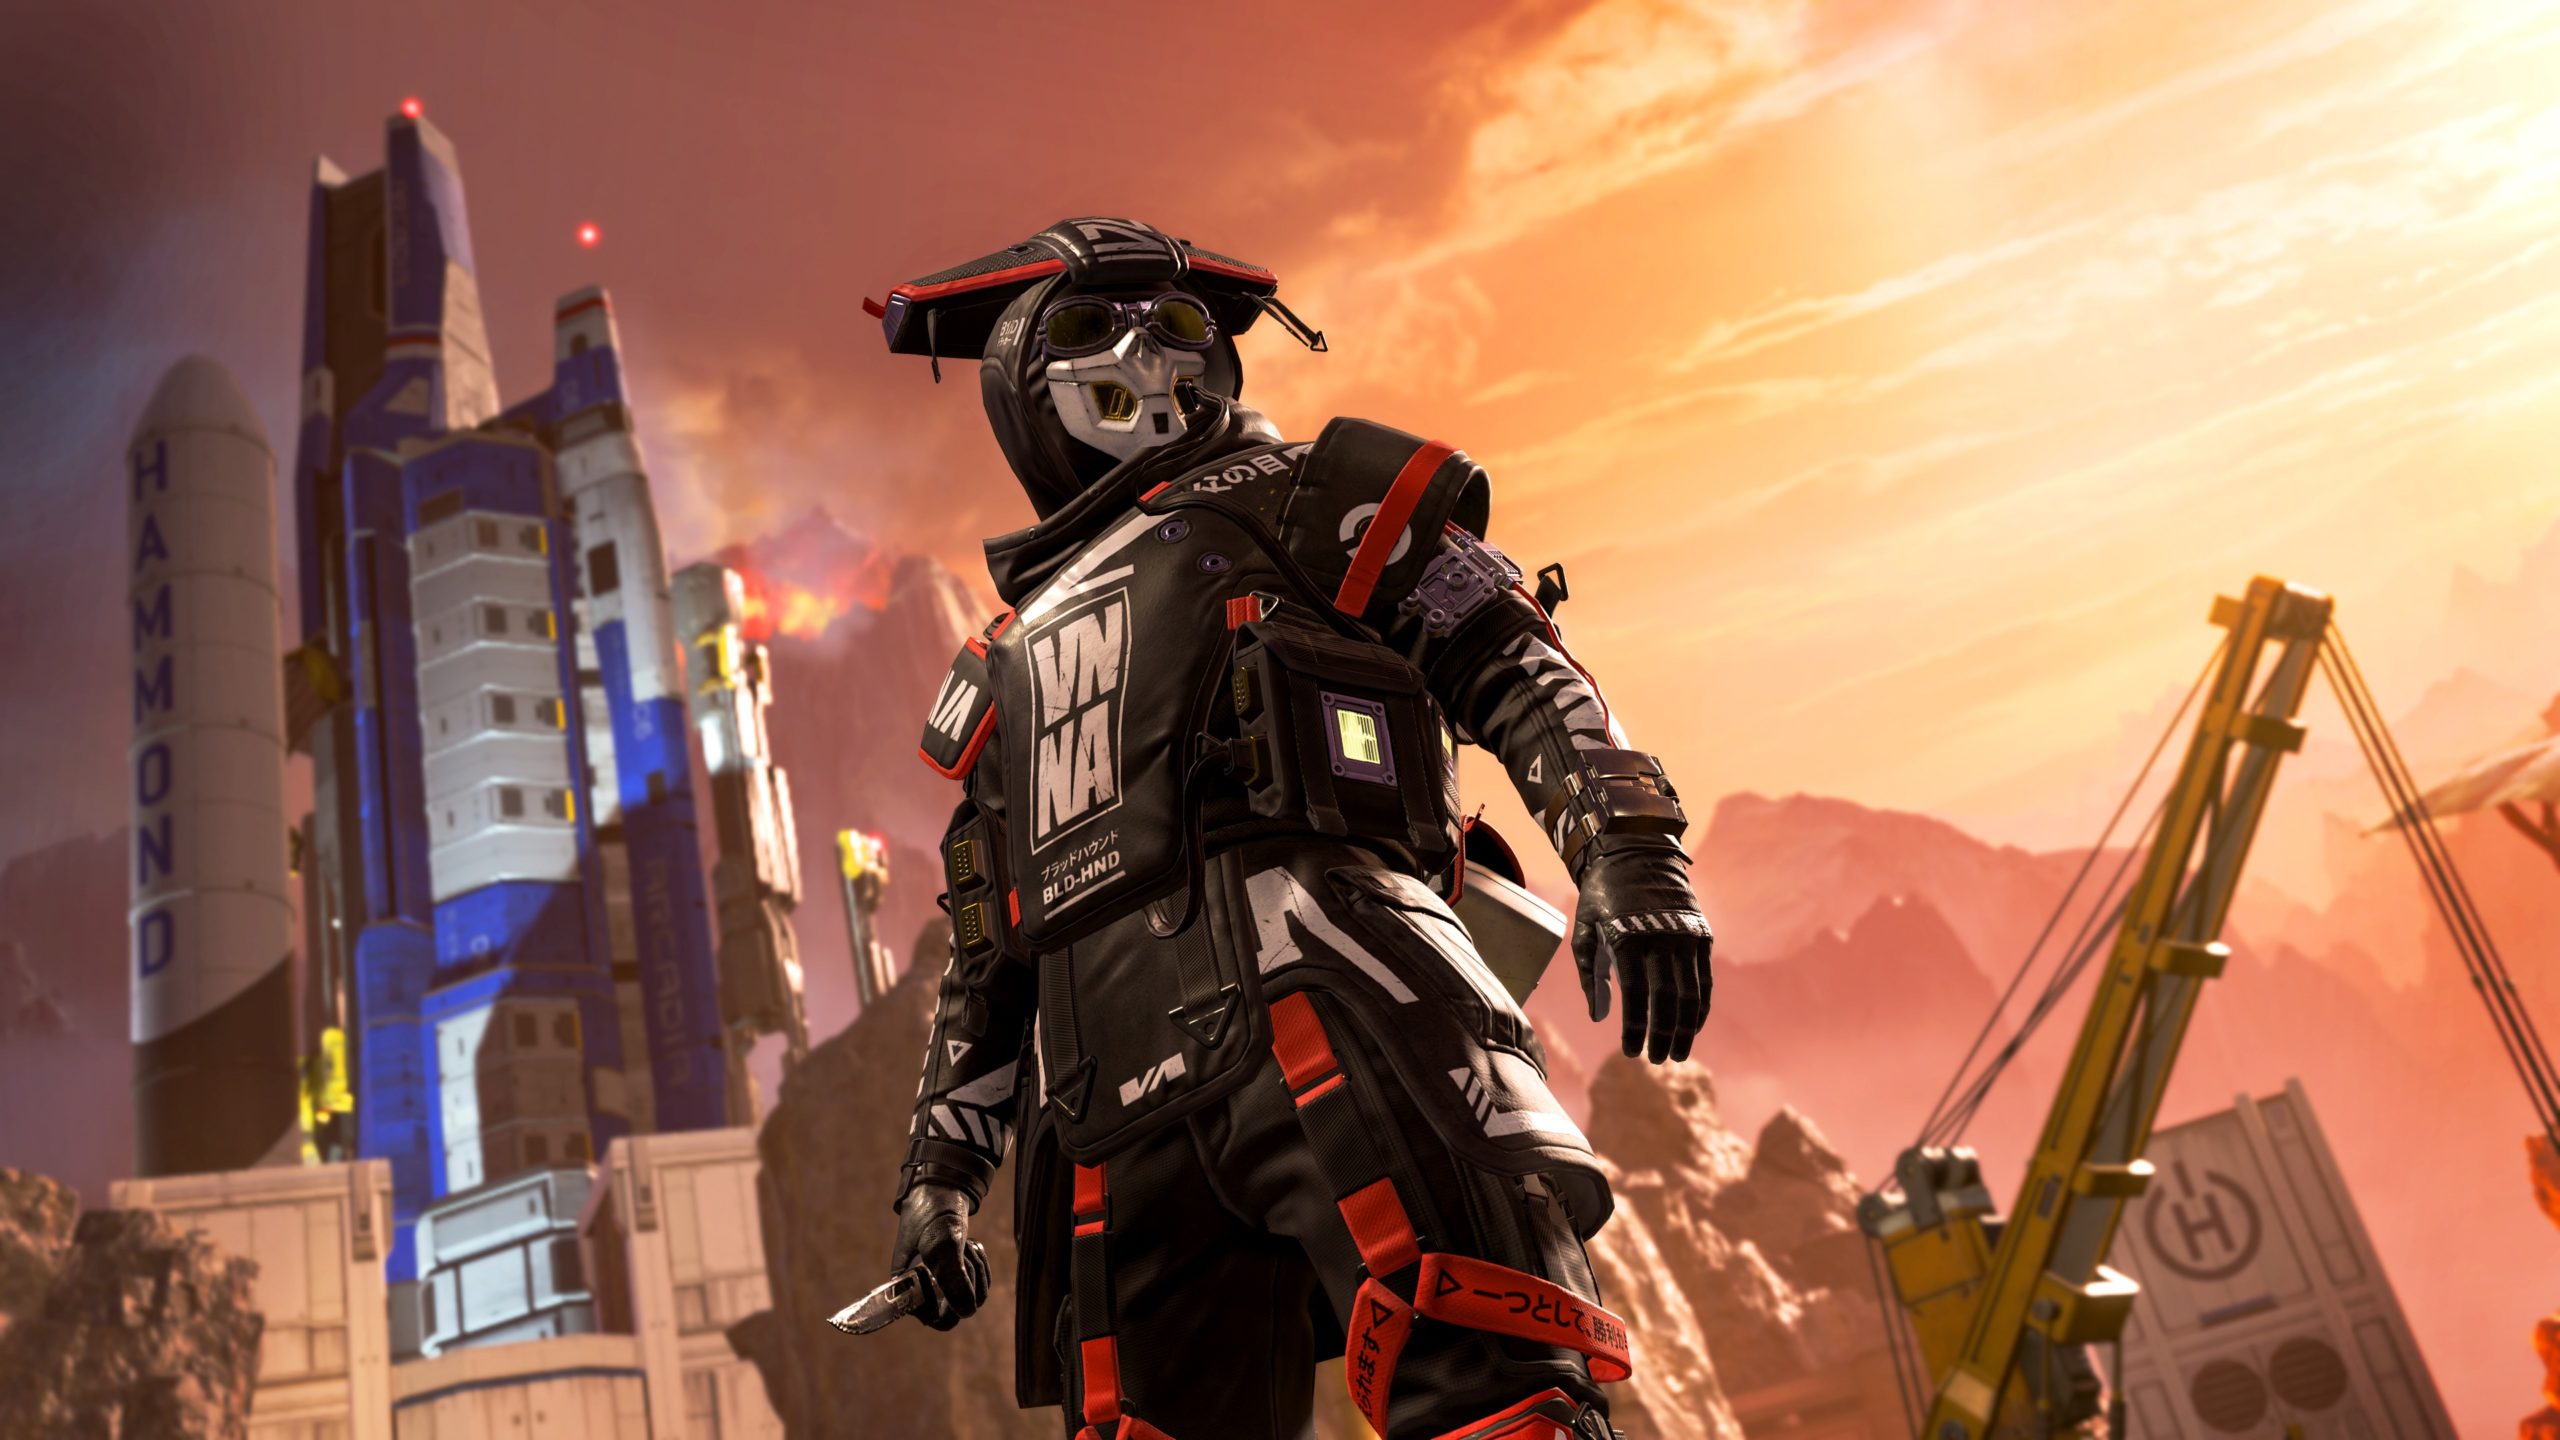 World S Edge Returns To Apex Legends Map Rotation Without The Rocket In Launch Site Dot Esports